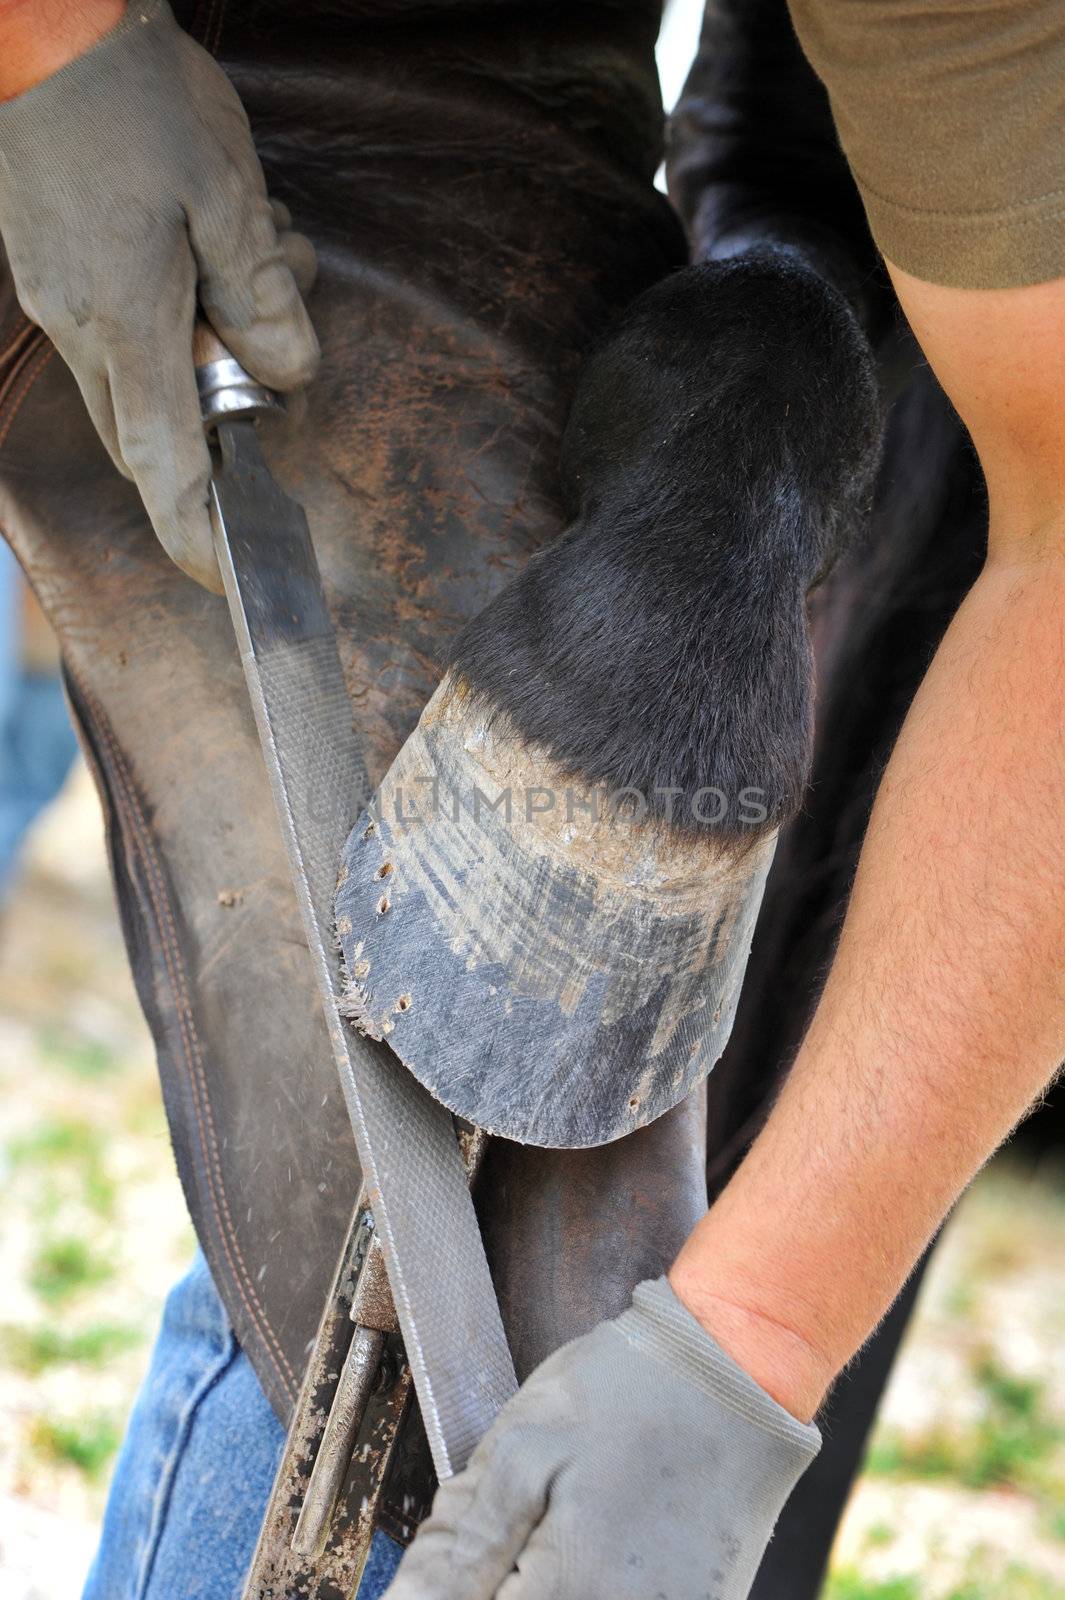 a Farrier rasping an horses hoof, close up on the hoof